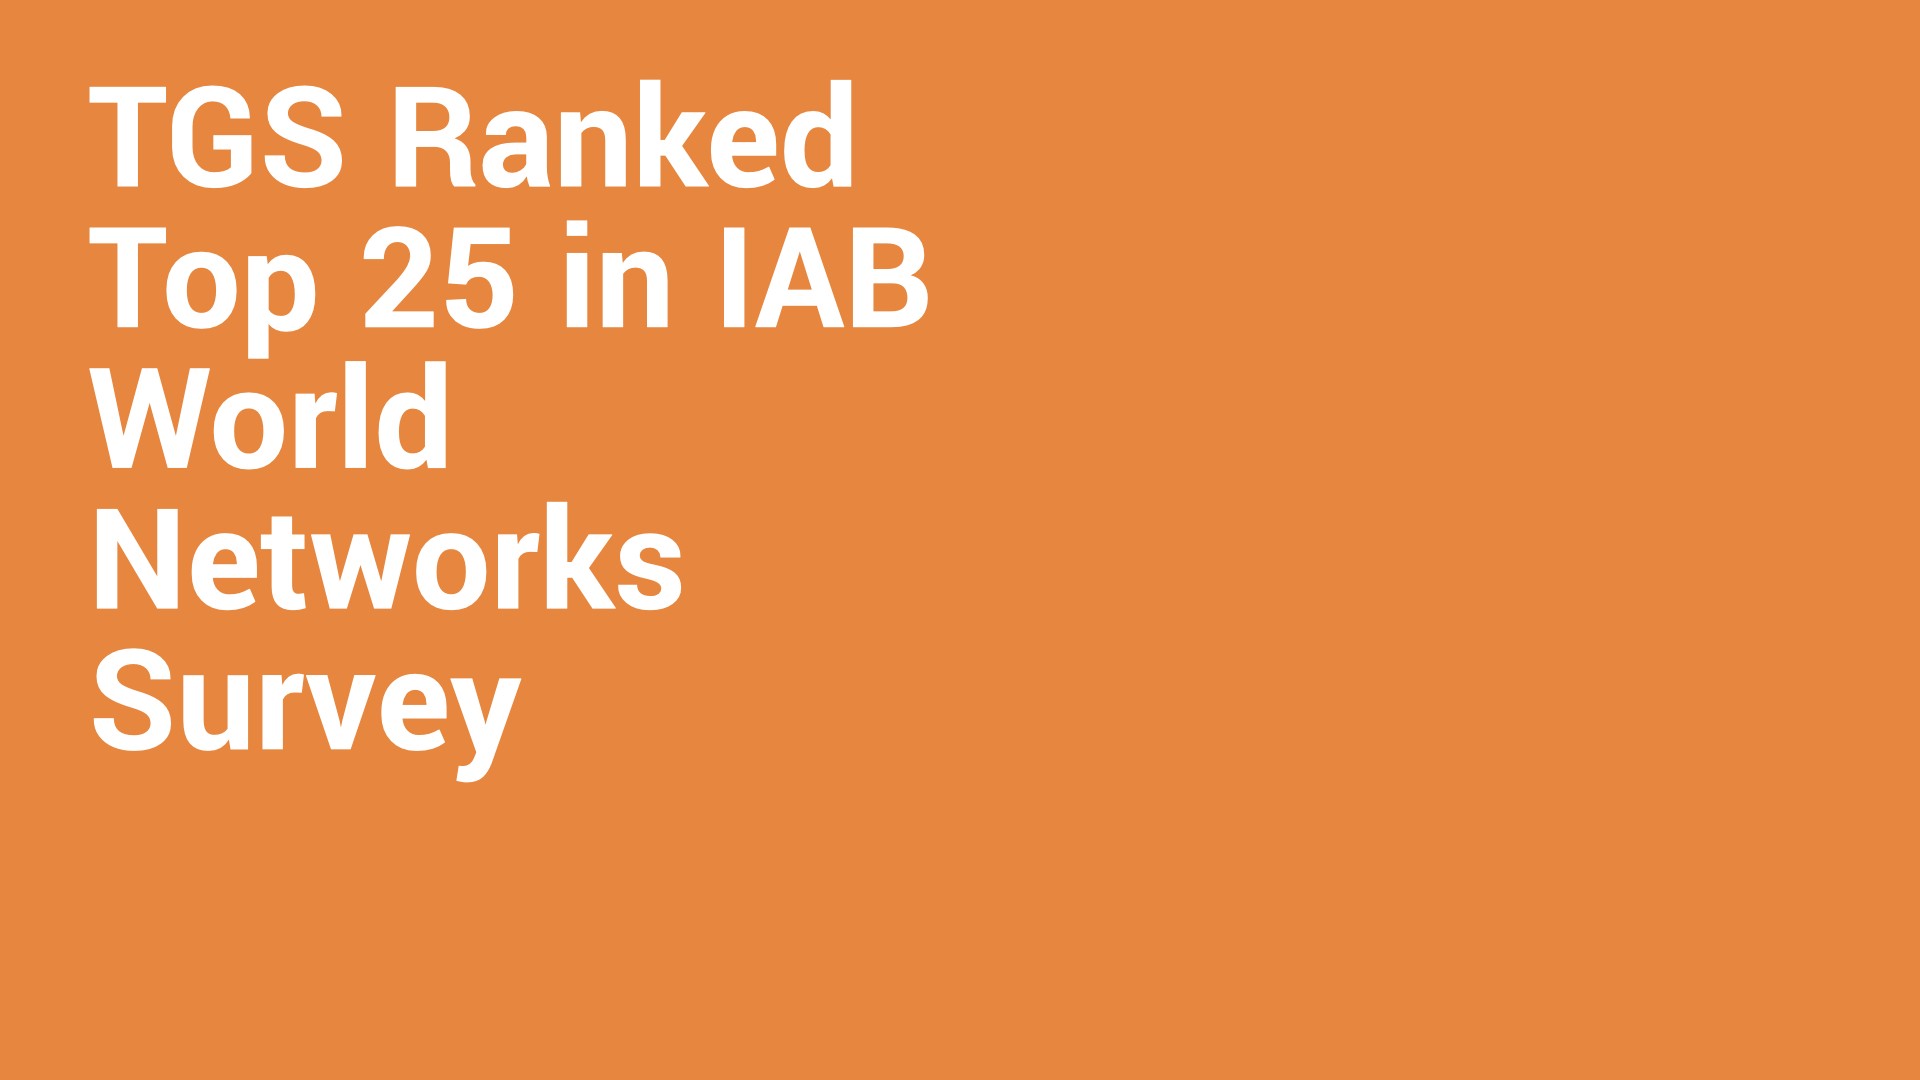 TGS ranked top 25 in IAB world networks survey